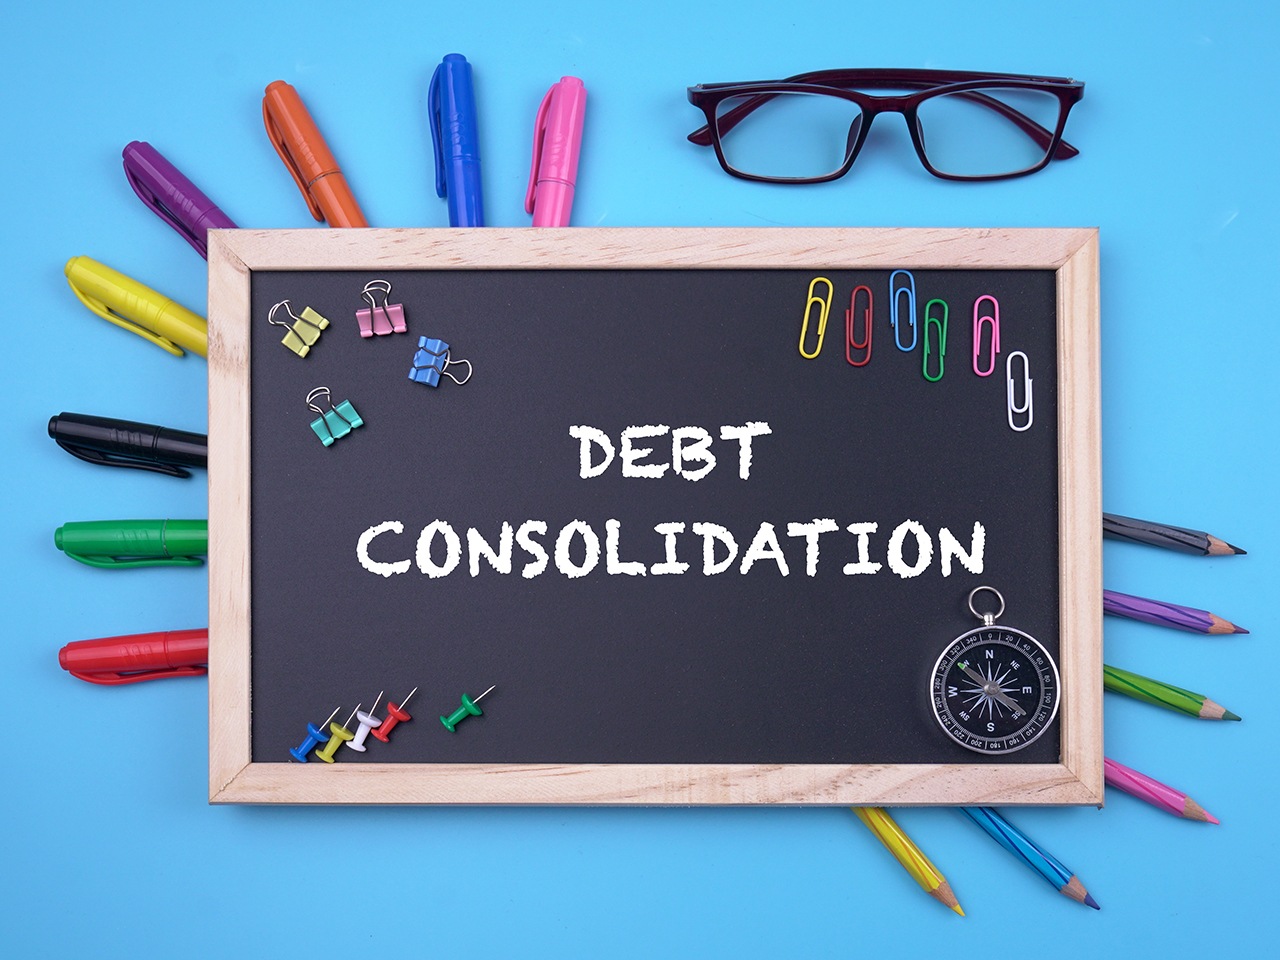 https://apmortgagesolutions.co.uk/wp-content/uploads/2021/08/debt-consolidation-image-1.jpg